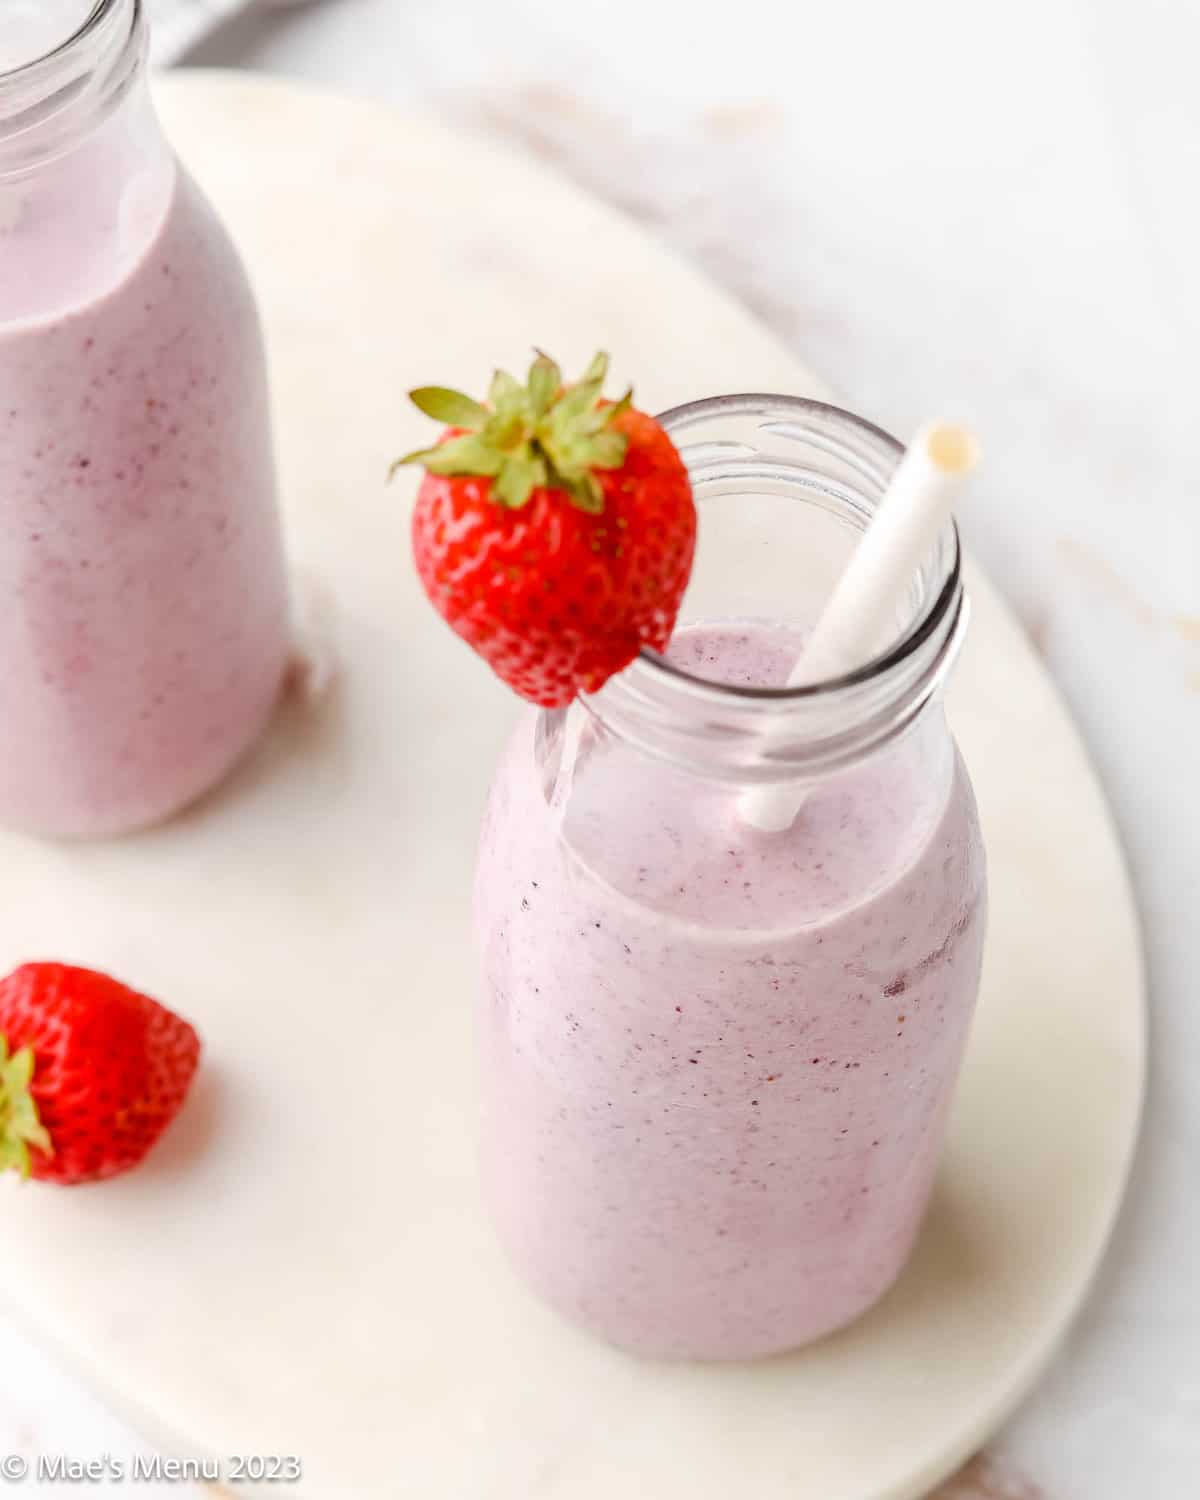 A close-up of a cottage cheese smoothie with a straw and a strawberry.